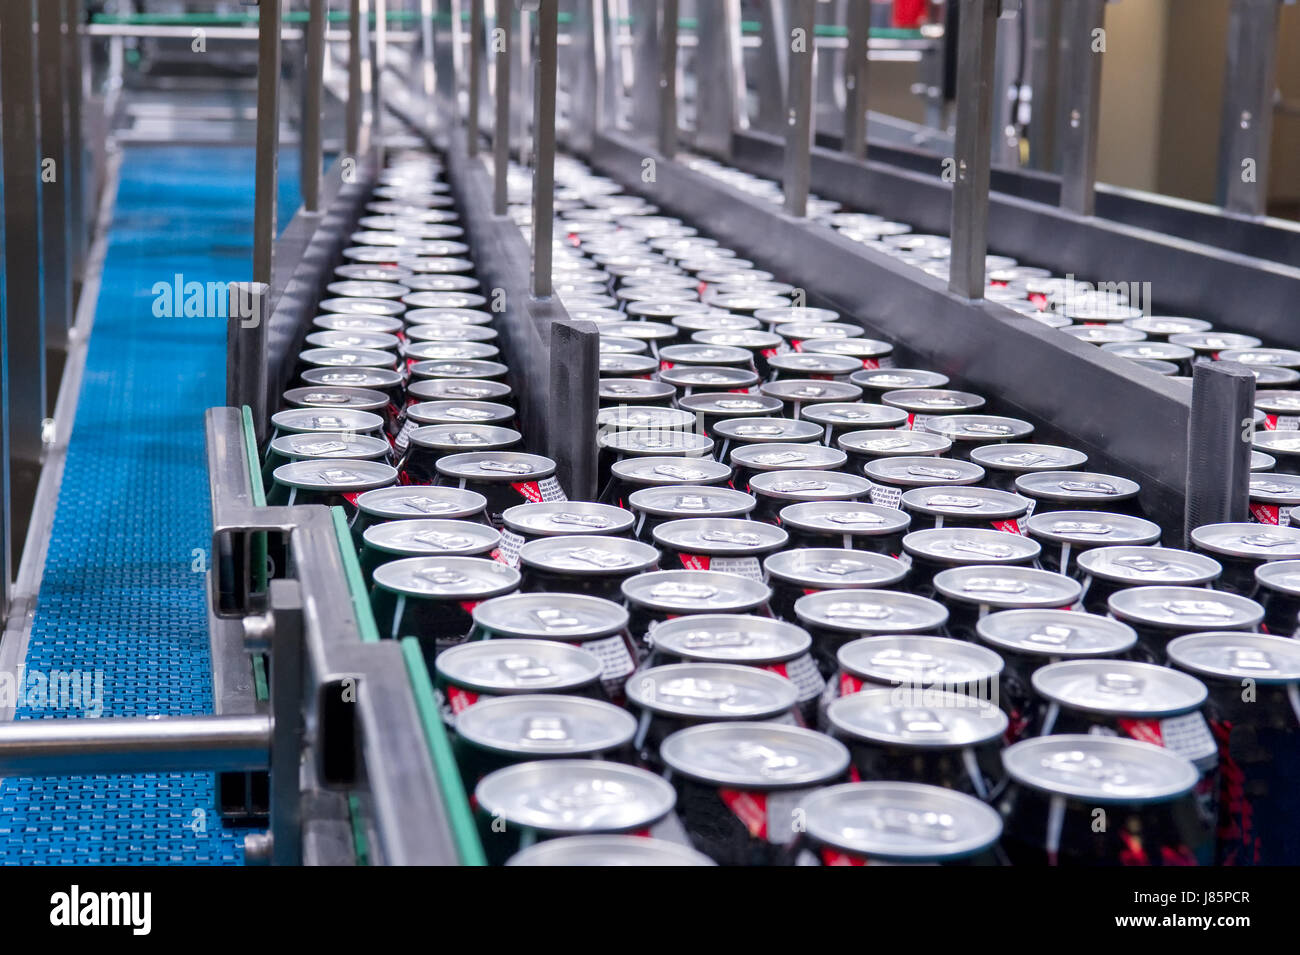 filling of beverage cans Stock Photo